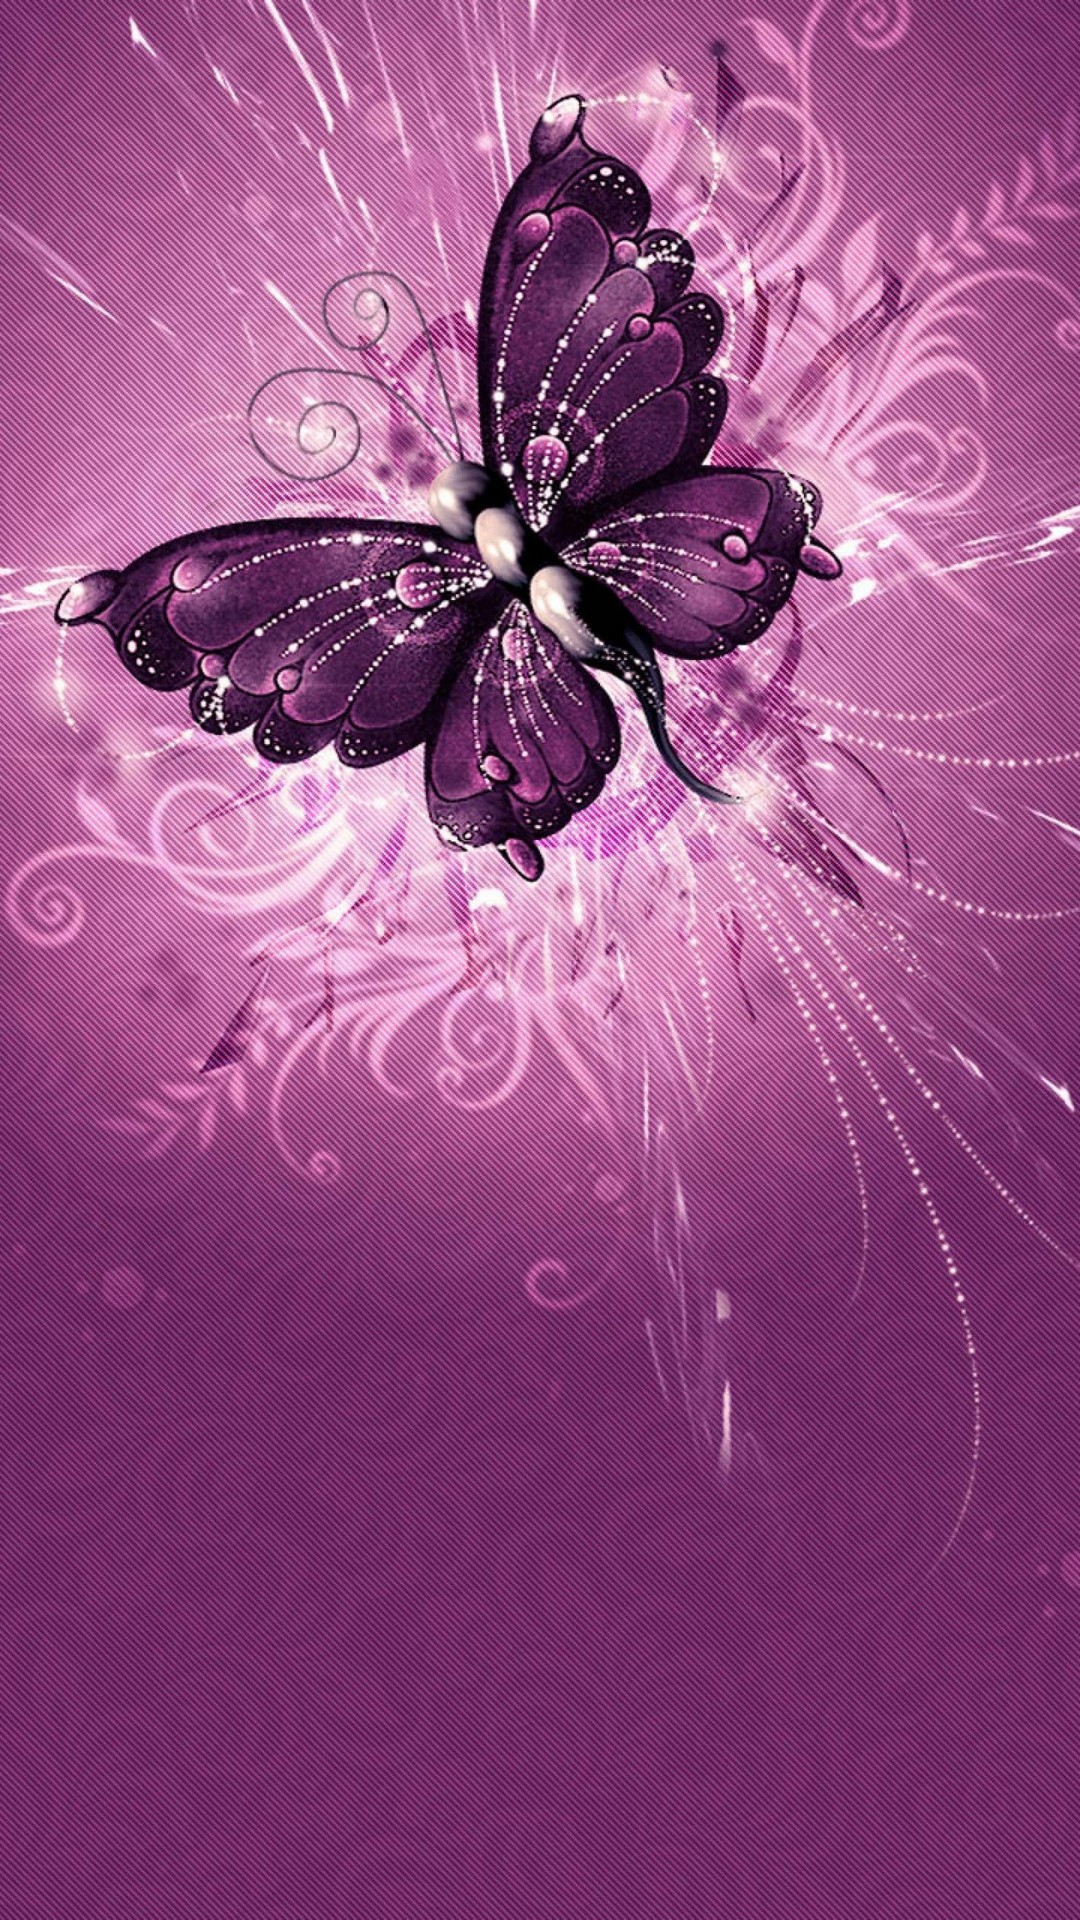 Purple Butterfly Wallpaper For Mobile Android - Pink Sparkly Butterflies - HD Wallpaper 